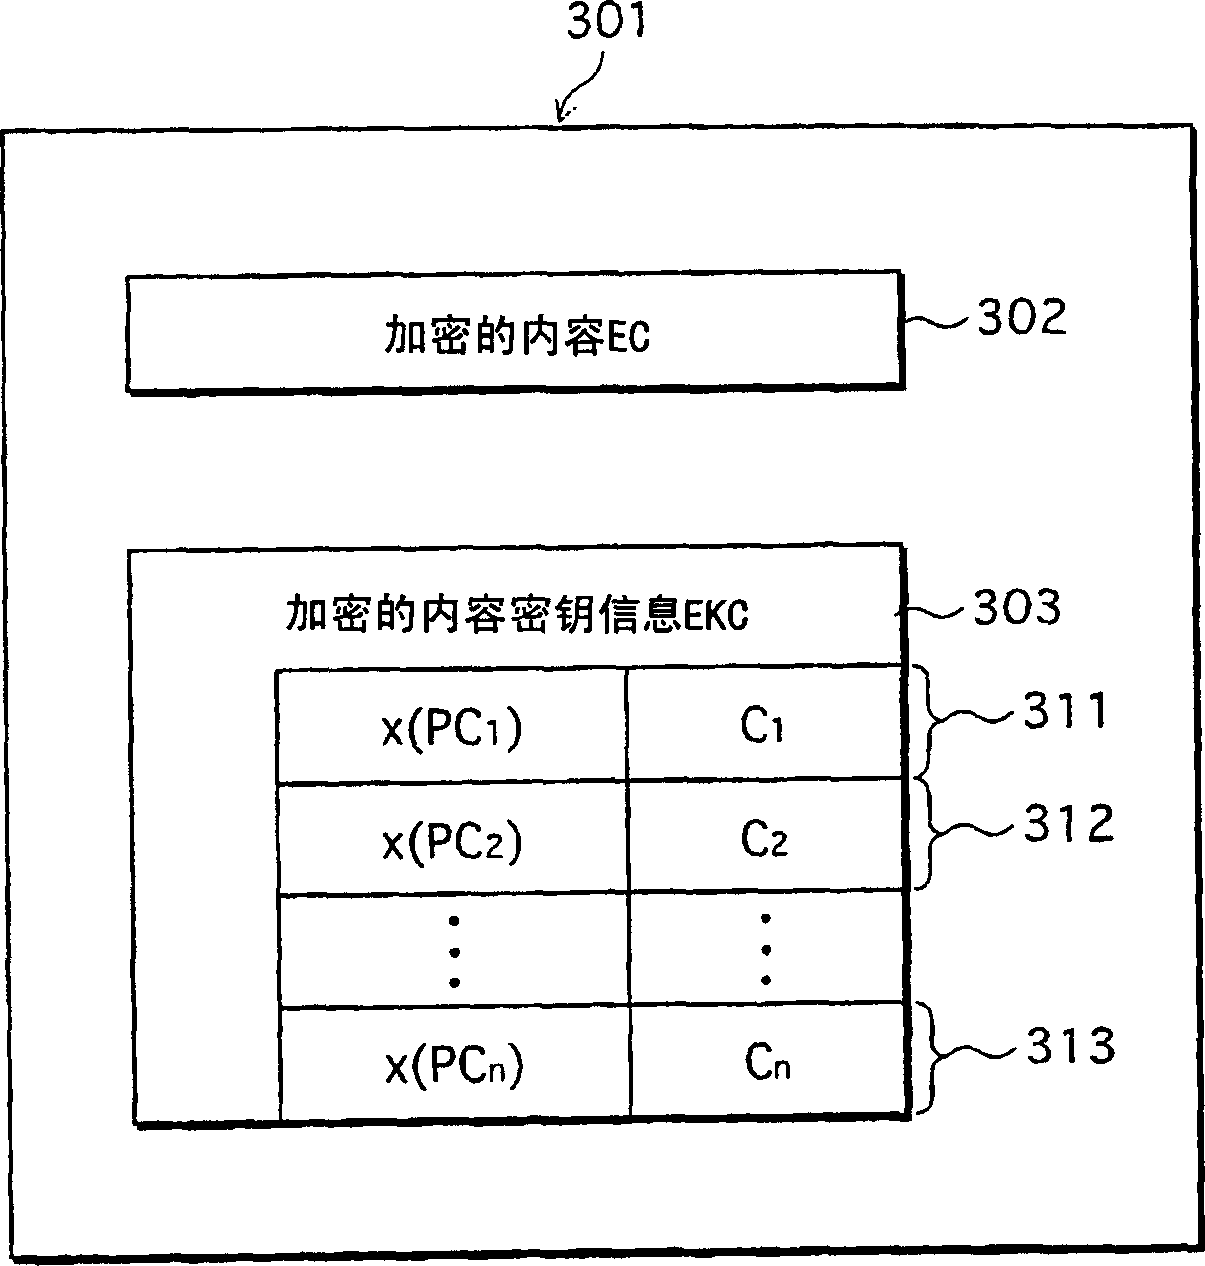 Information transfer system, encryption device, and decryption device using elliptic curve cryptography